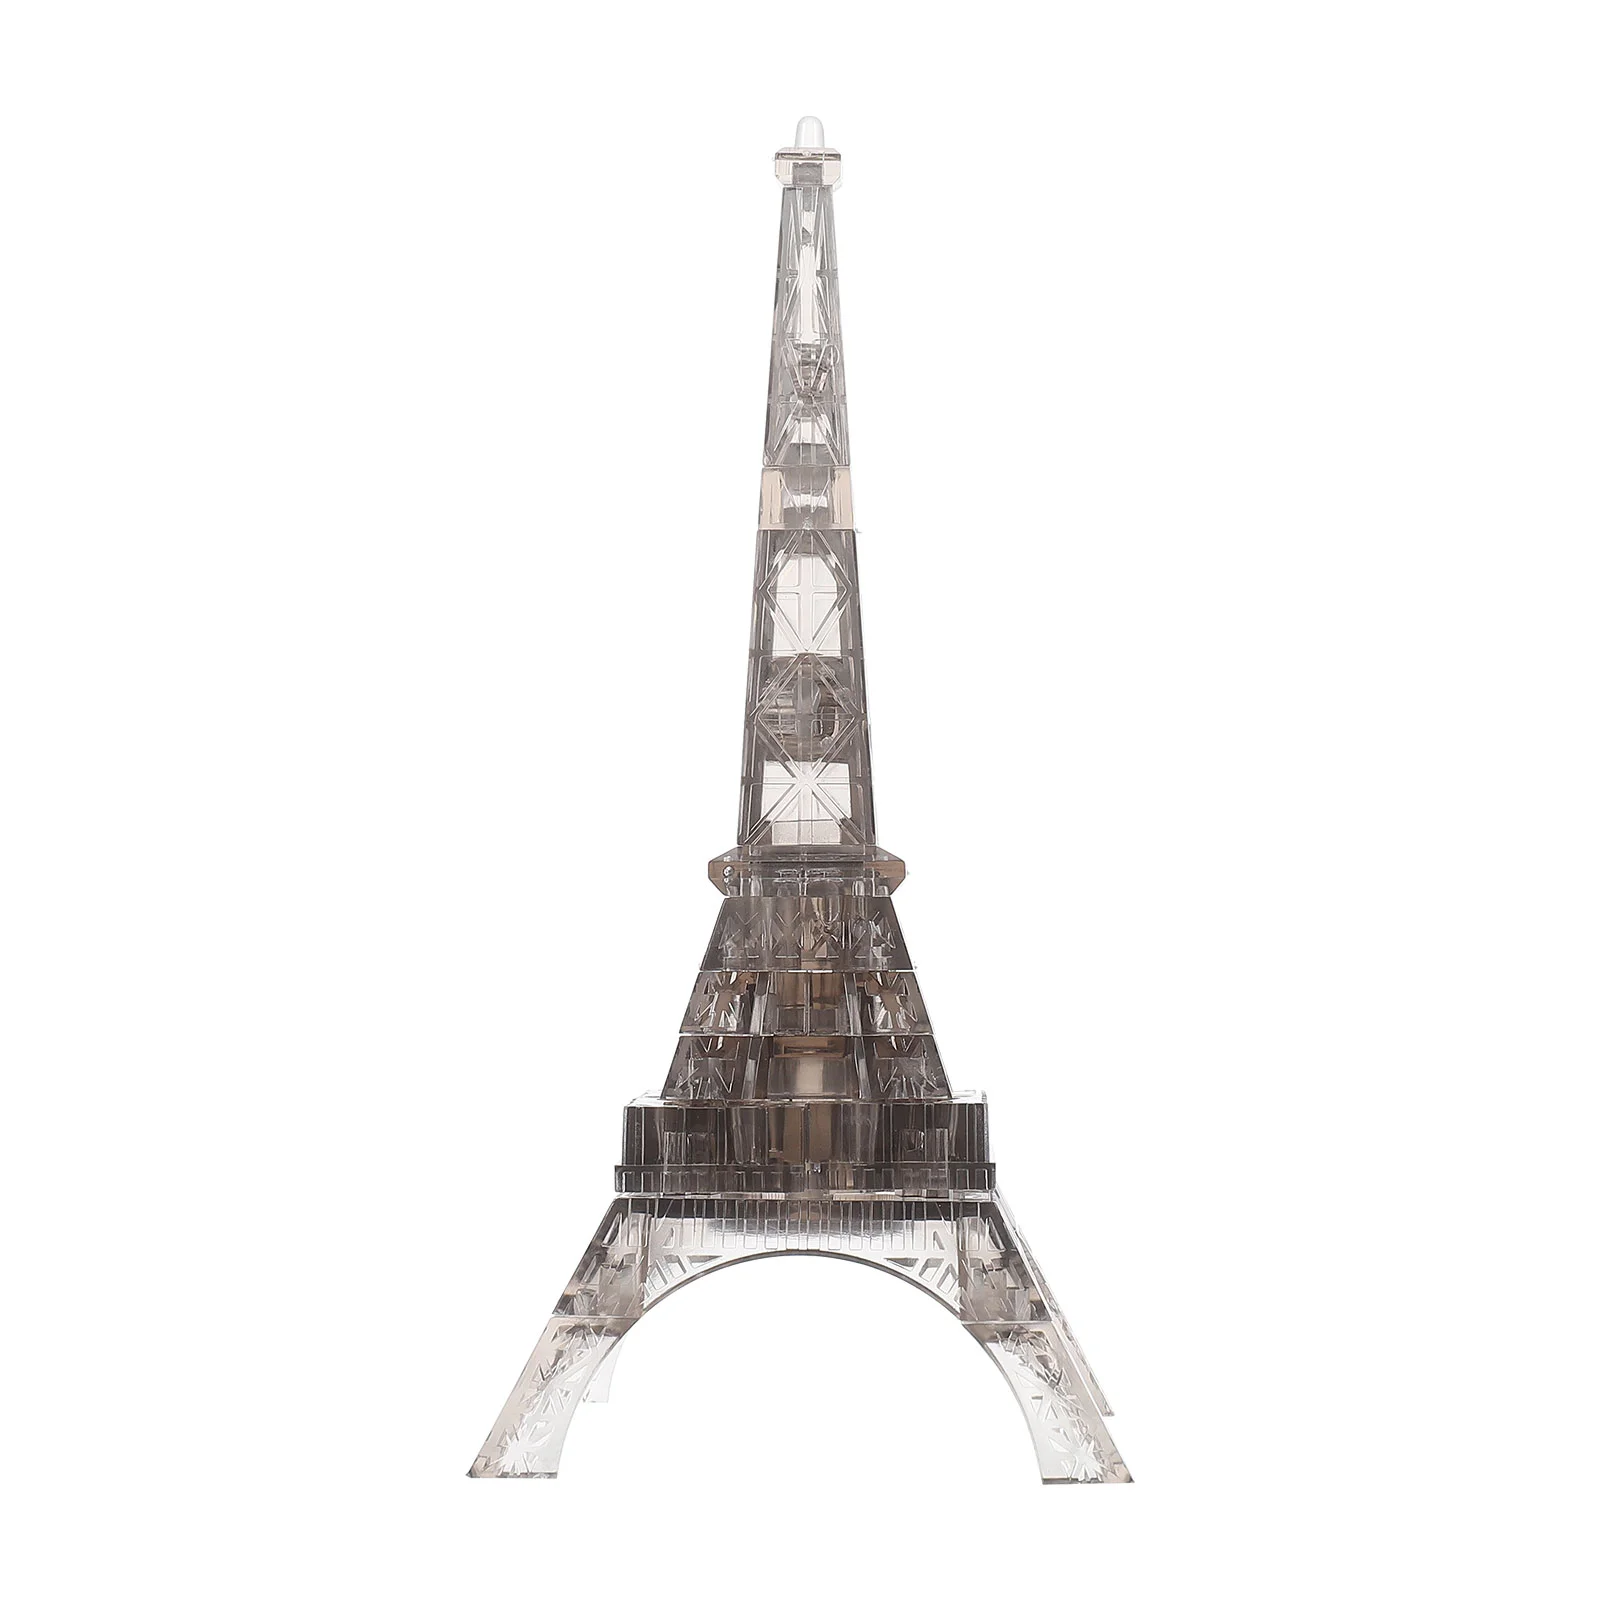 3D Transparent Eiffel Tower Puzzle Crystal Jigsaw Pieces Building Blocks Brain Teaser Educational Early Learning, Grey toy educational intelligence game early learning luban lock puzzle toy metal brain teaser toys metal wire puzzle puzzles game